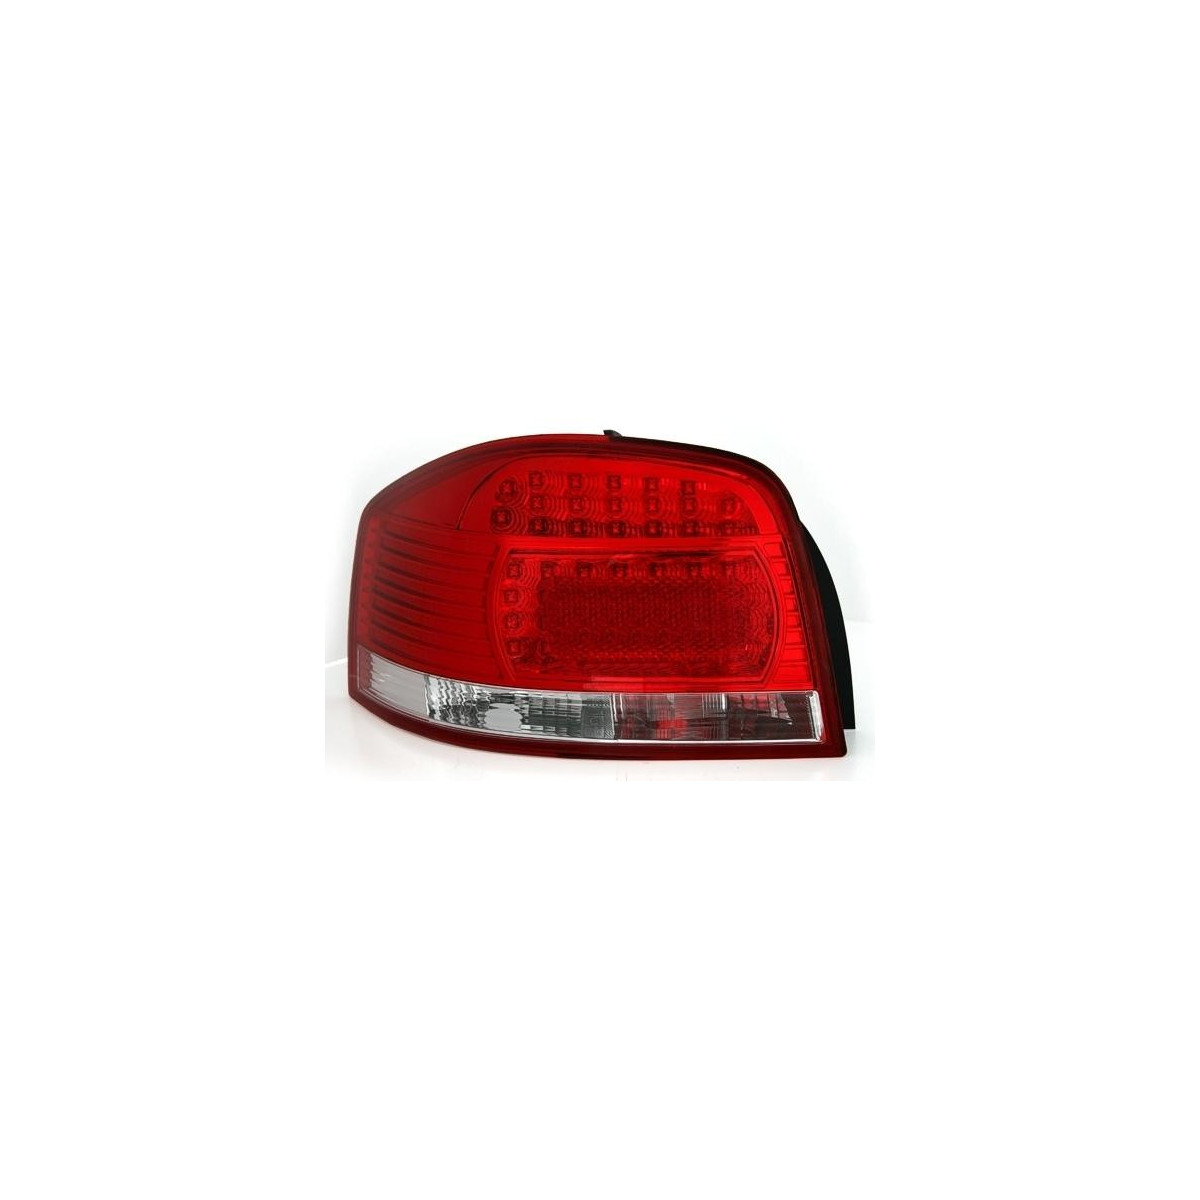 LAMPY TYLNE LED  AUDI A3 8P 9/03- RED WHITE